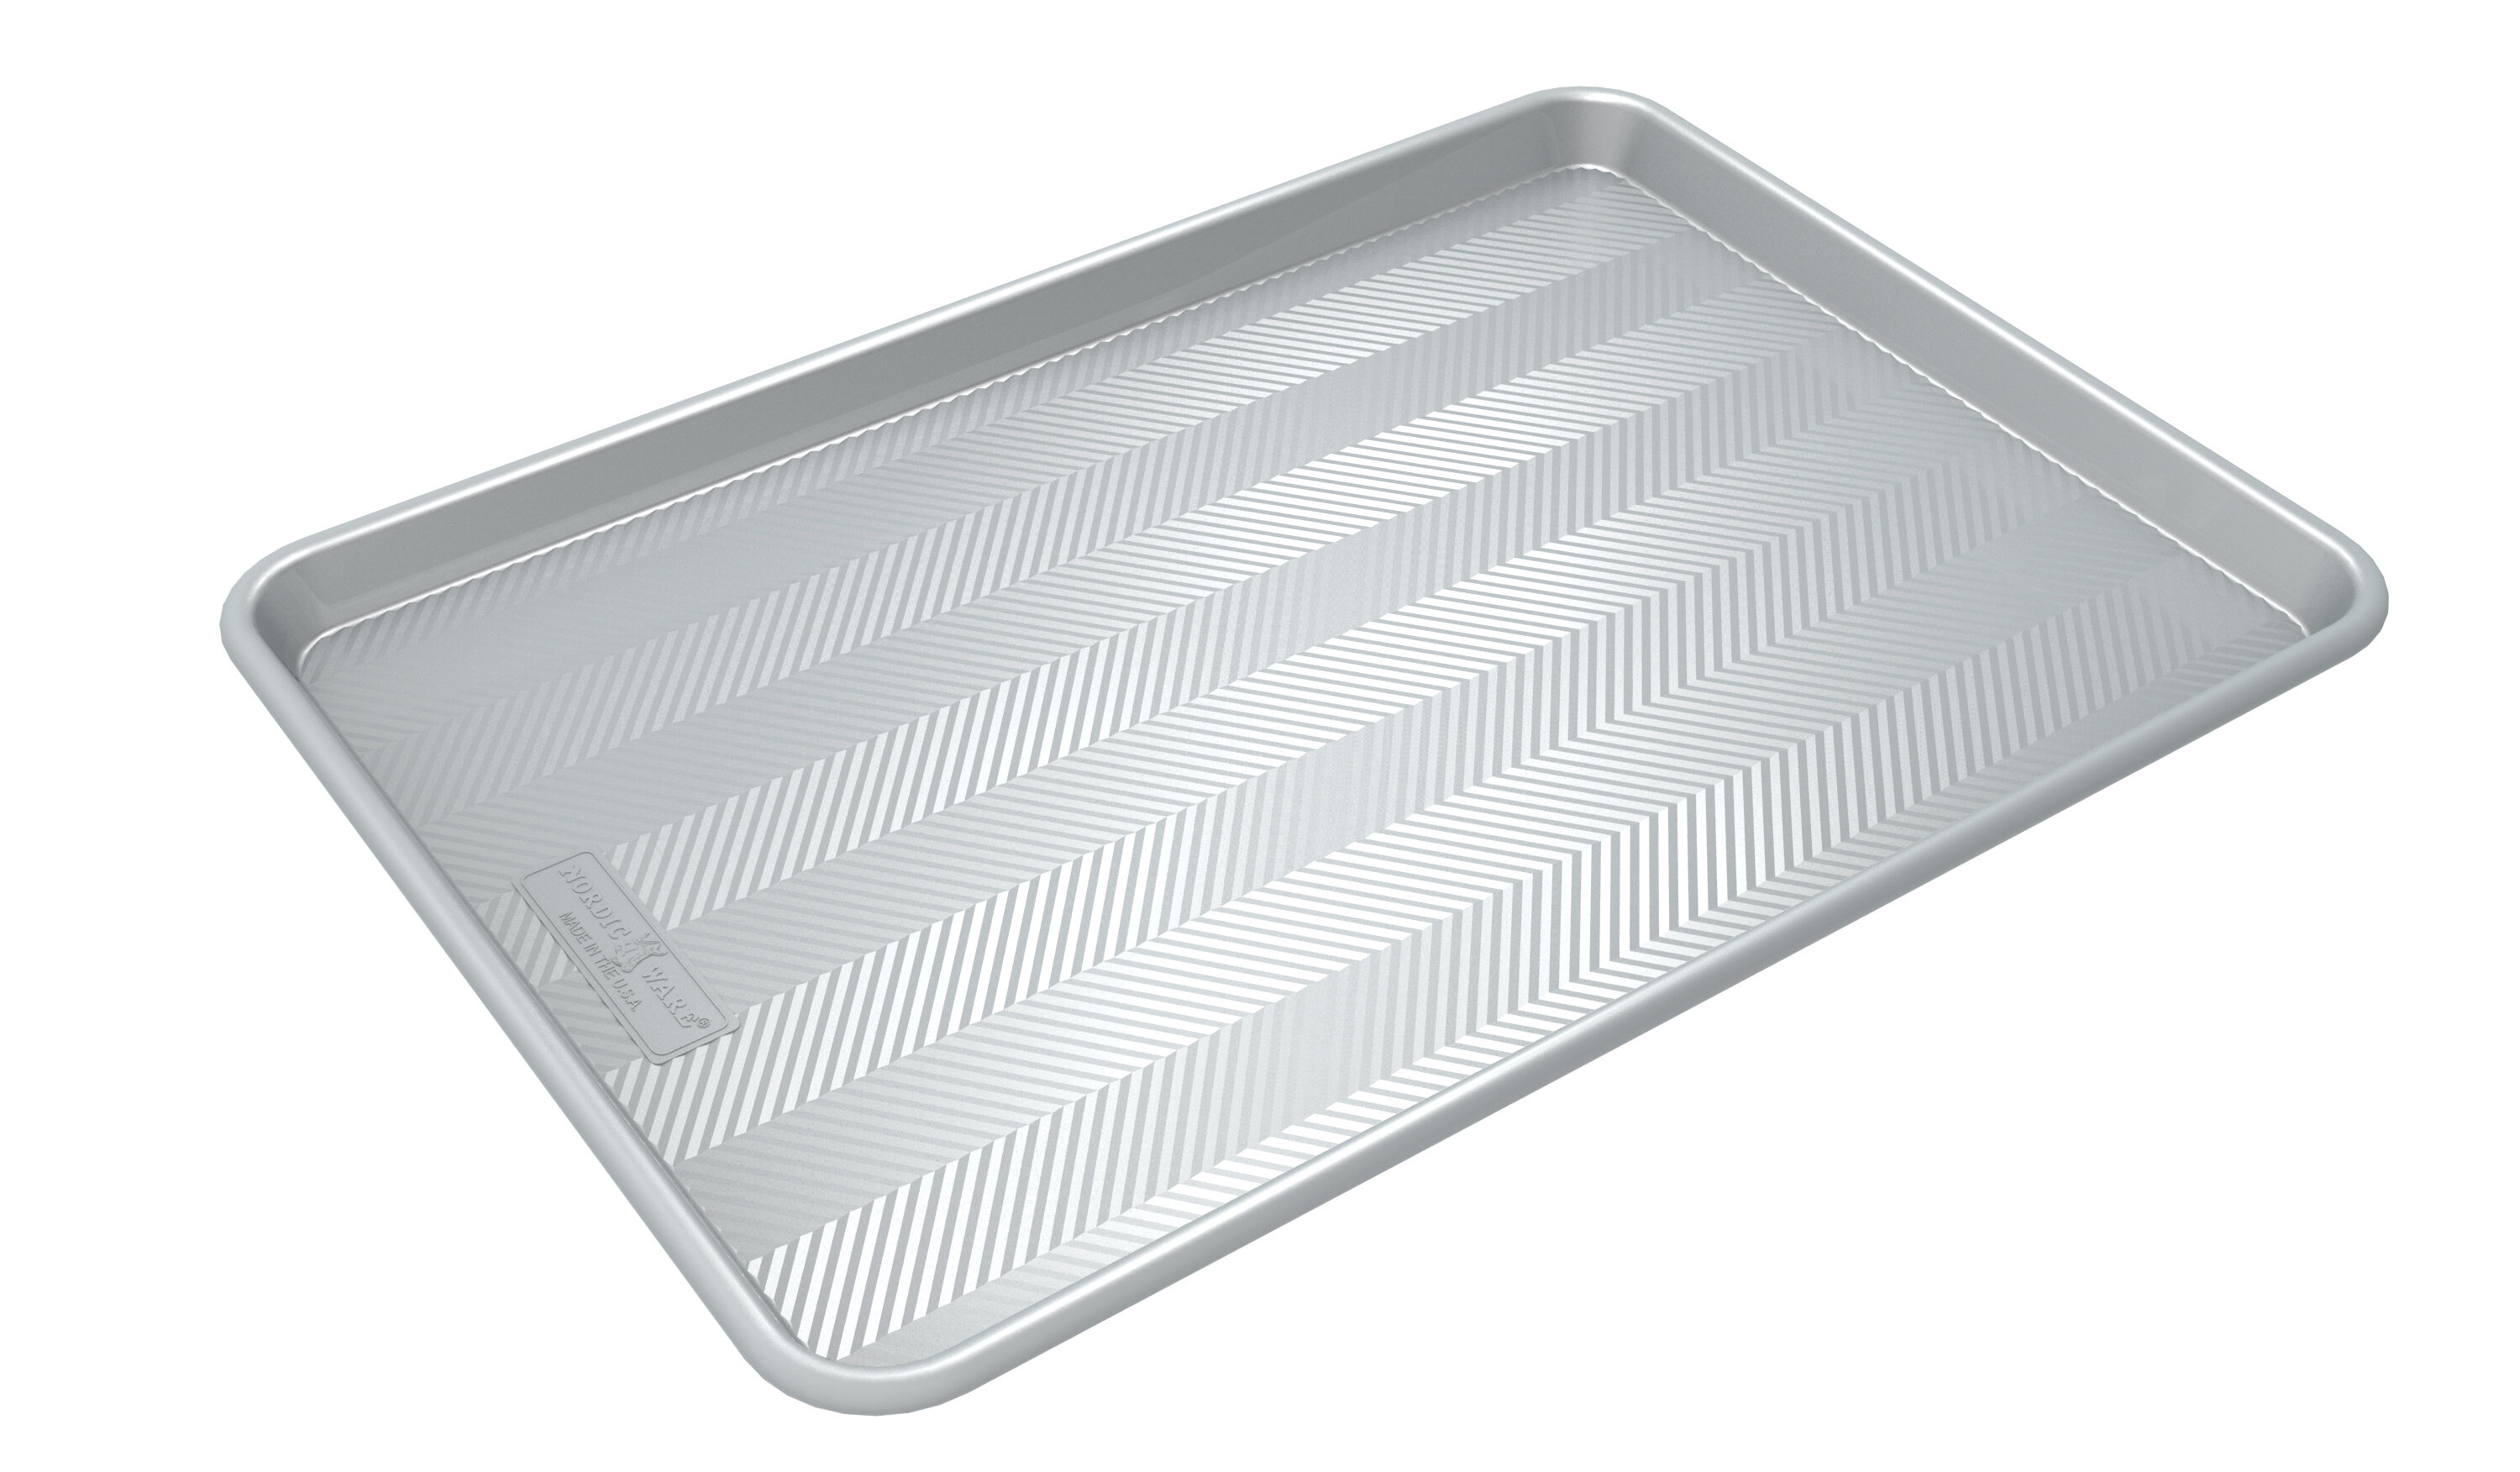 Nordic Ware fits all standard Big Extra Large Baking Sheet Pan Silver